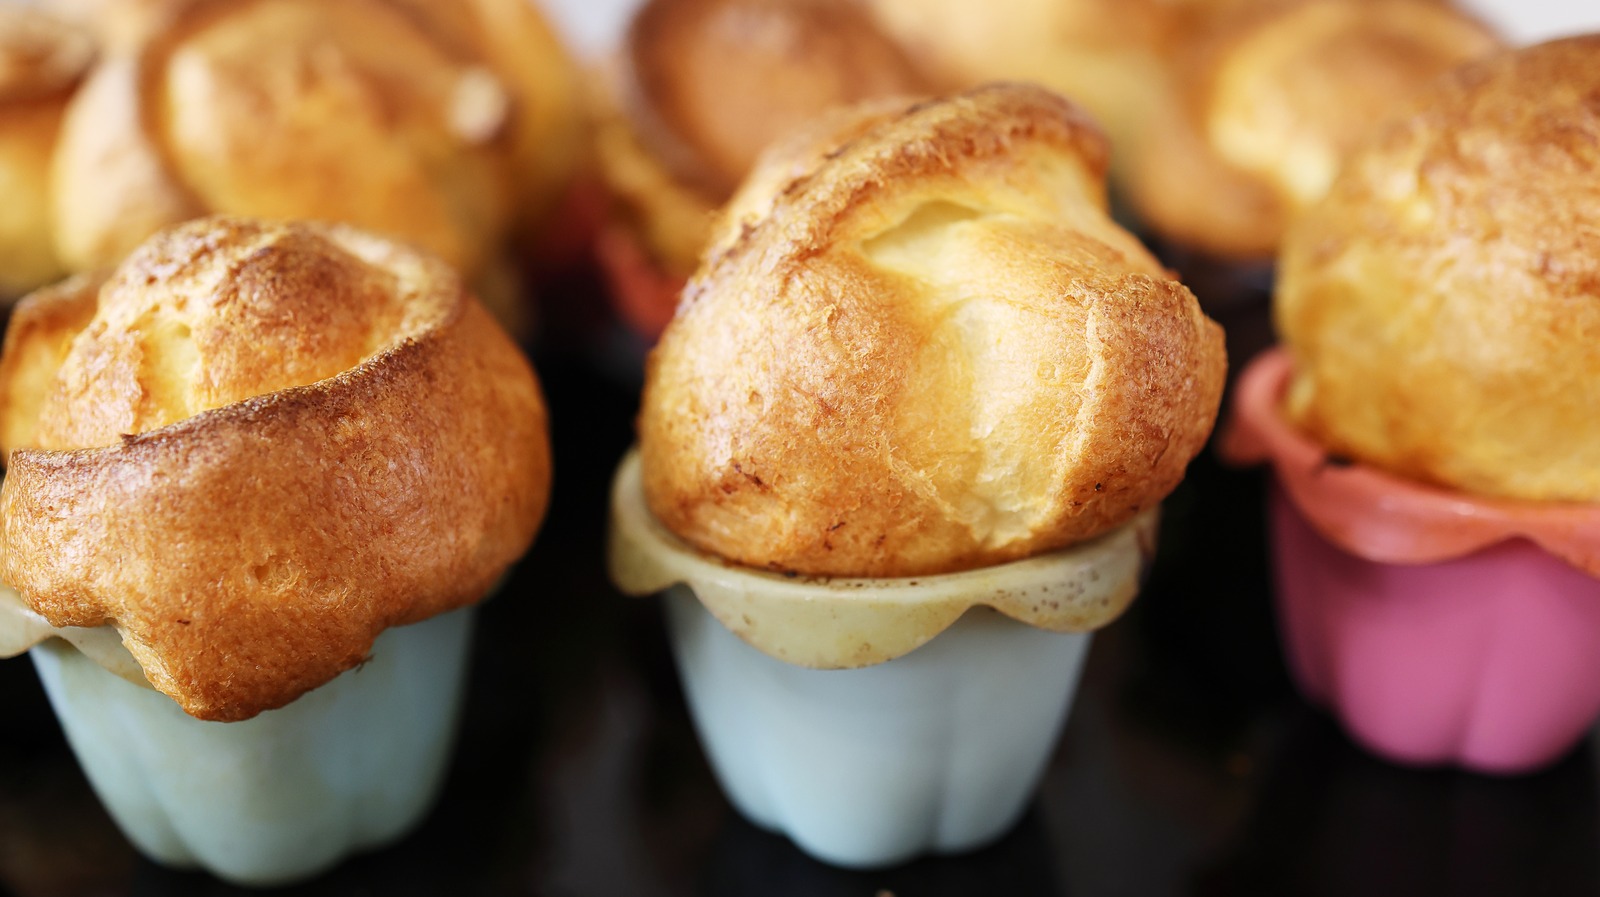 https://www.tastingtable.com/img/gallery/why-you-should-use-a-whisk-when-making-popovers/l-intro-1671547984.jpg